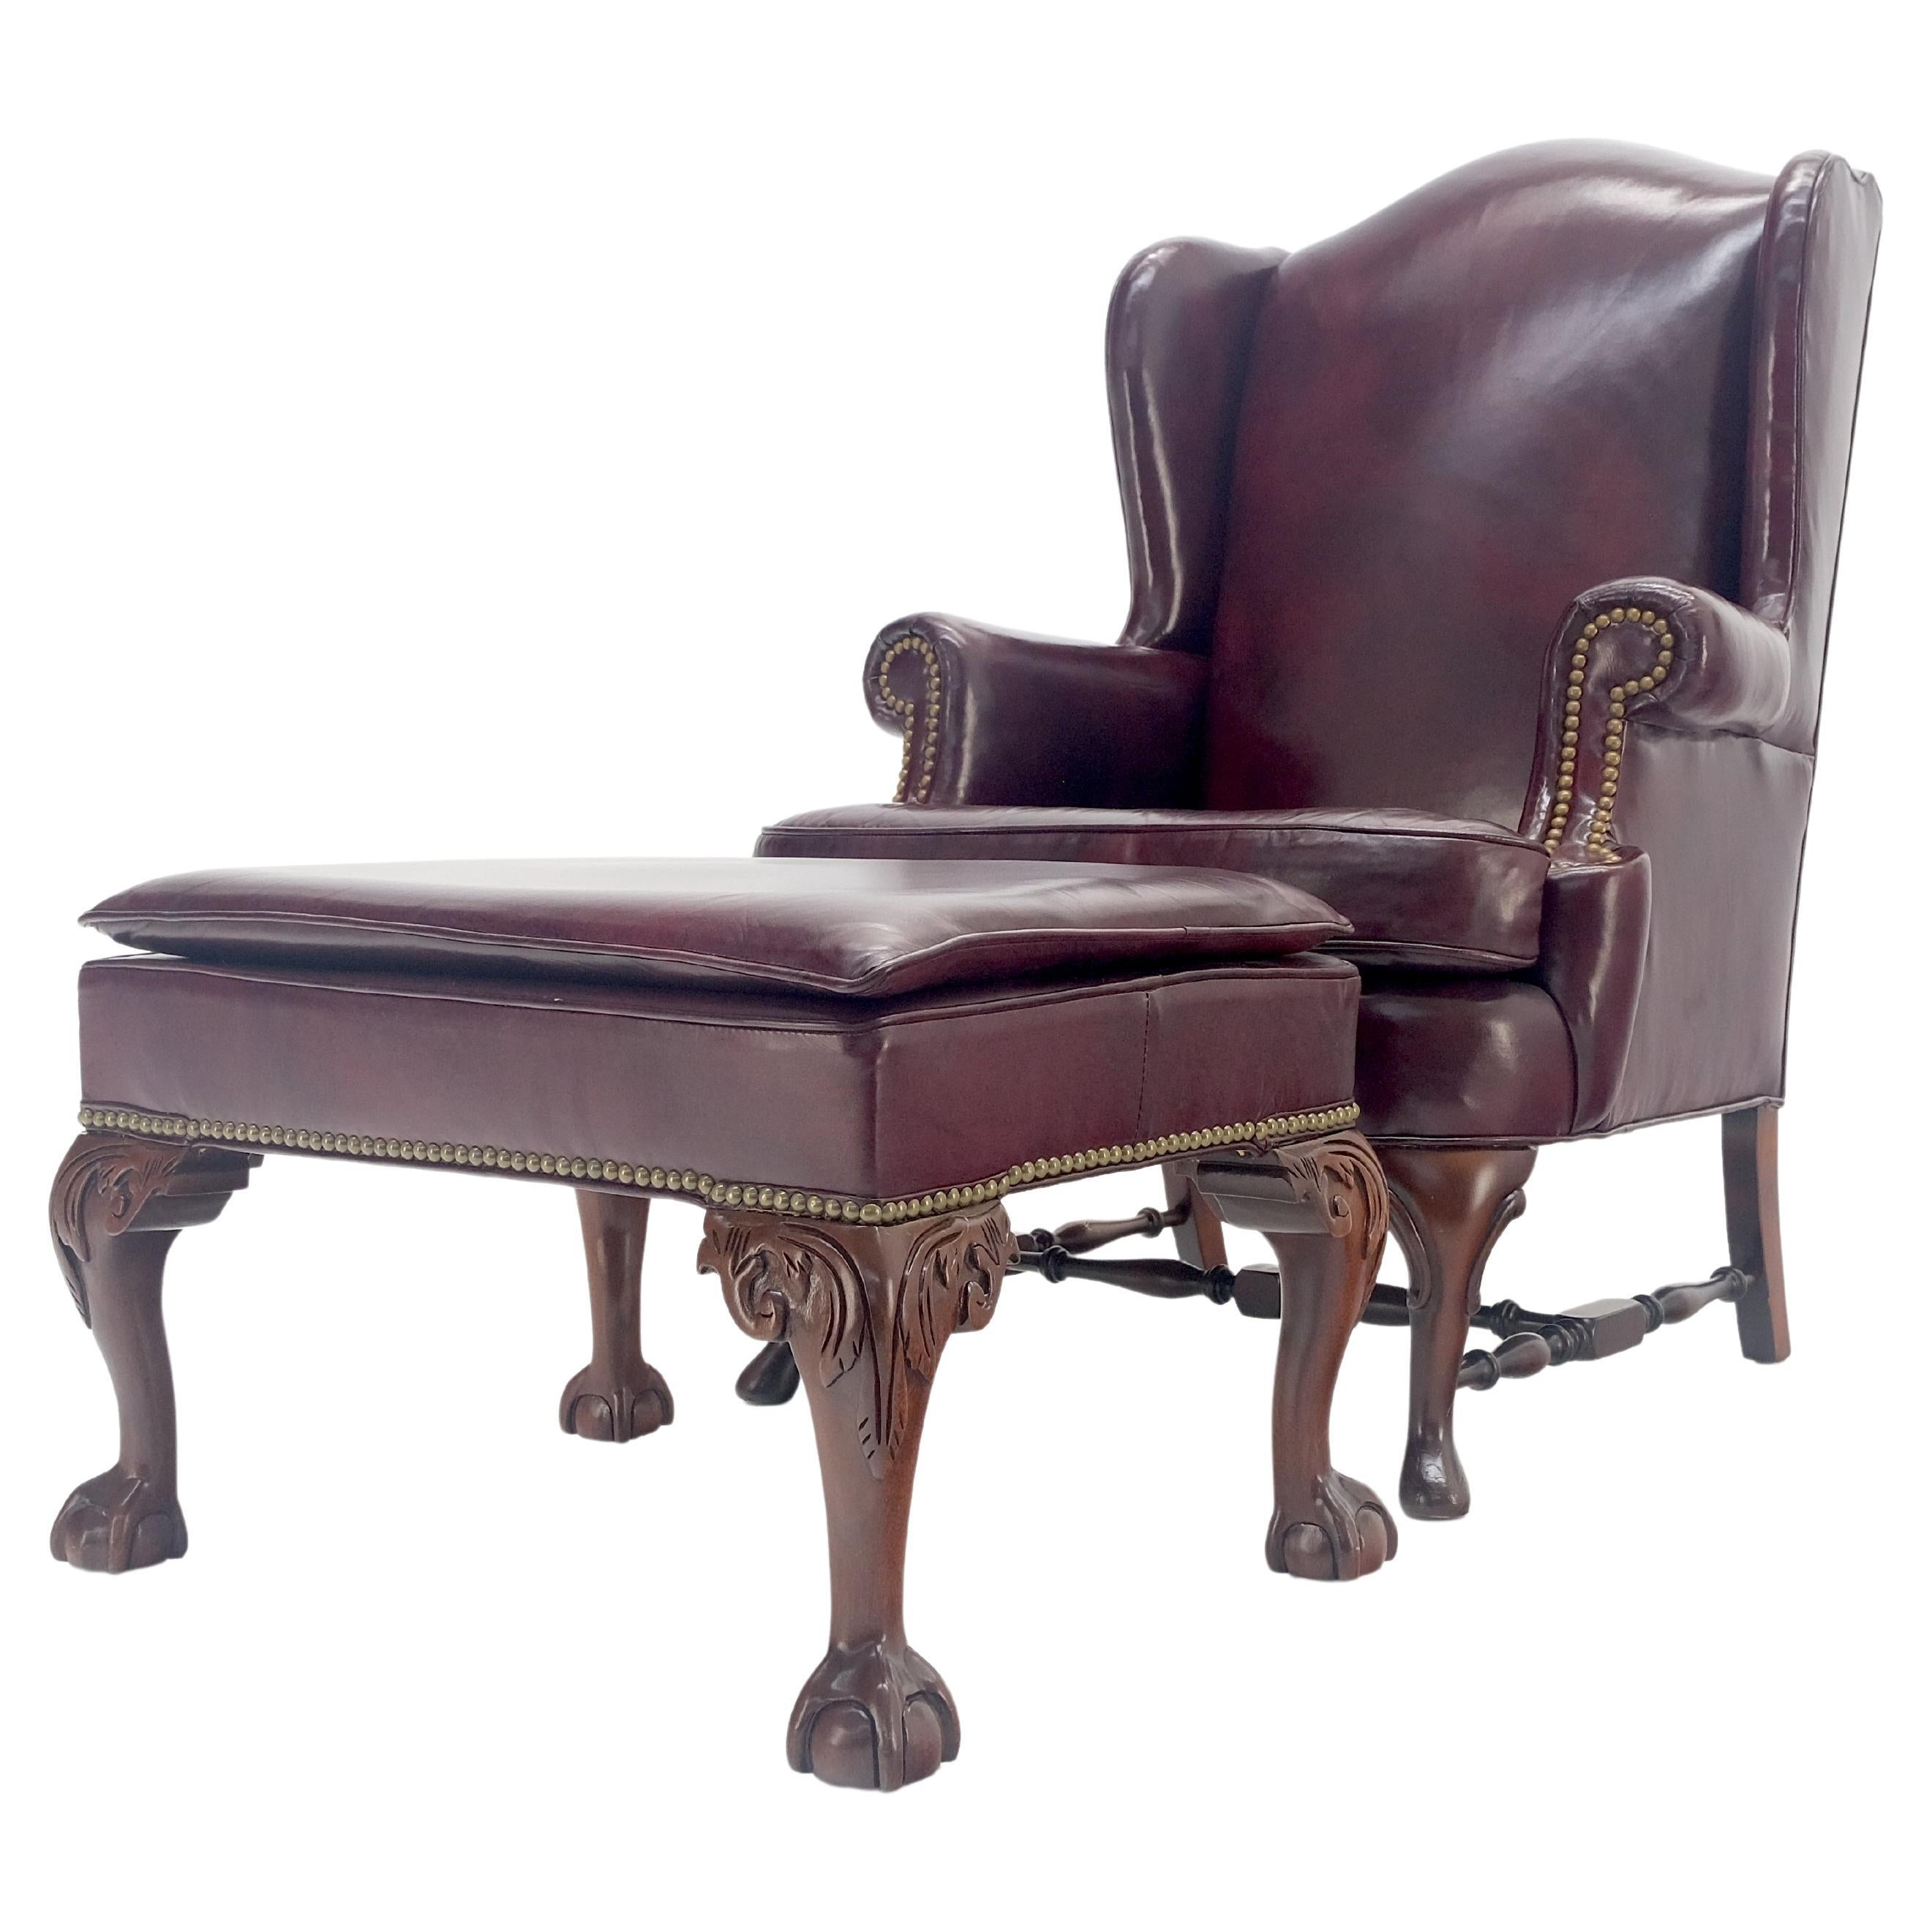 Kindel Burgundy Leather Upholstery Carved Mahogany Legs Wingback Chair & Ottoman For Sale